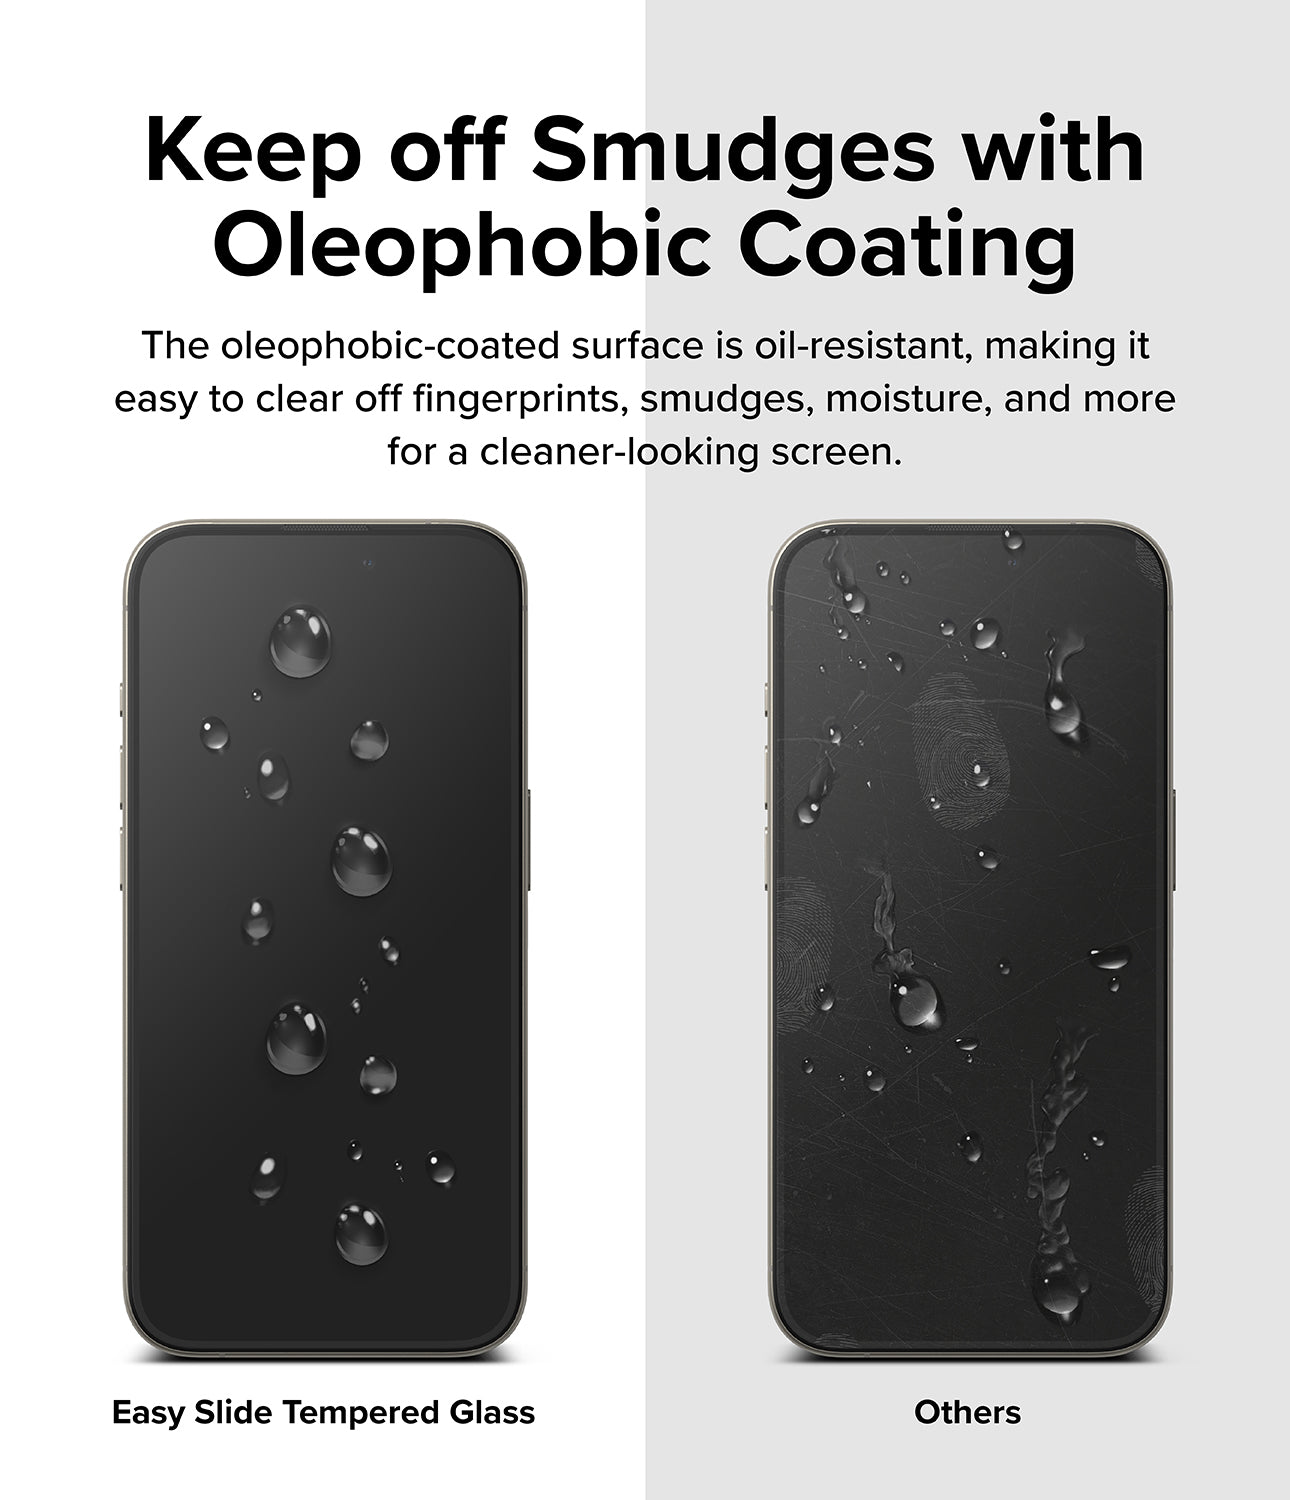 iPhone 15 Pro Screen Protector | Easy Slide Tempered Glass- Keep off Smudges with Oleophobic Coating. The oleophobic-coated surface is oil-resistant, making it easy to clear off fingerprints, smudges, moisture, and more for a cleaner-looking screen.